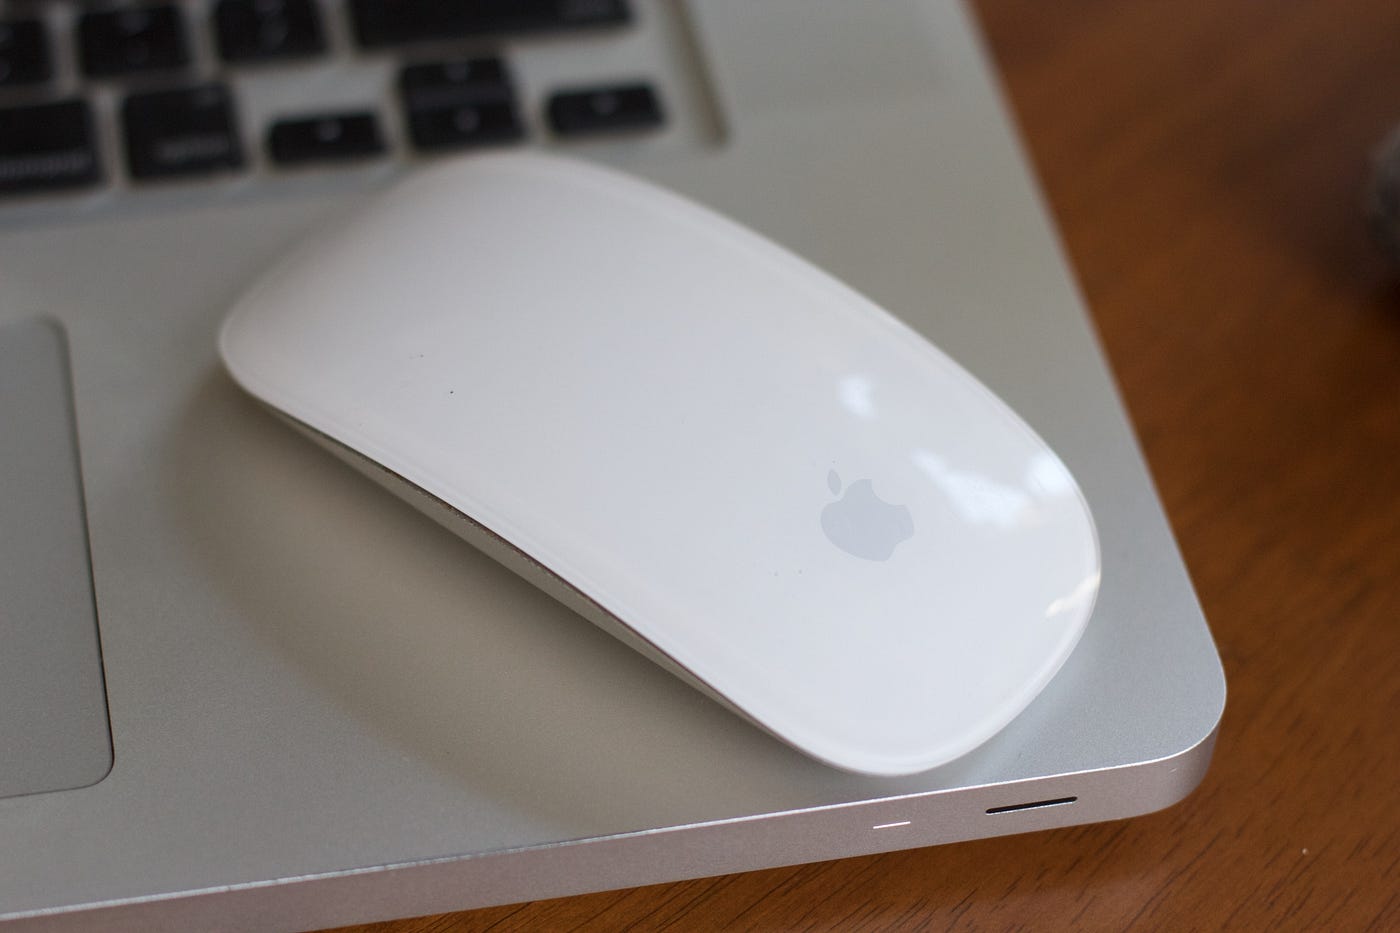 Best Apple Magic Mouse 3. Introduction, by YOWD